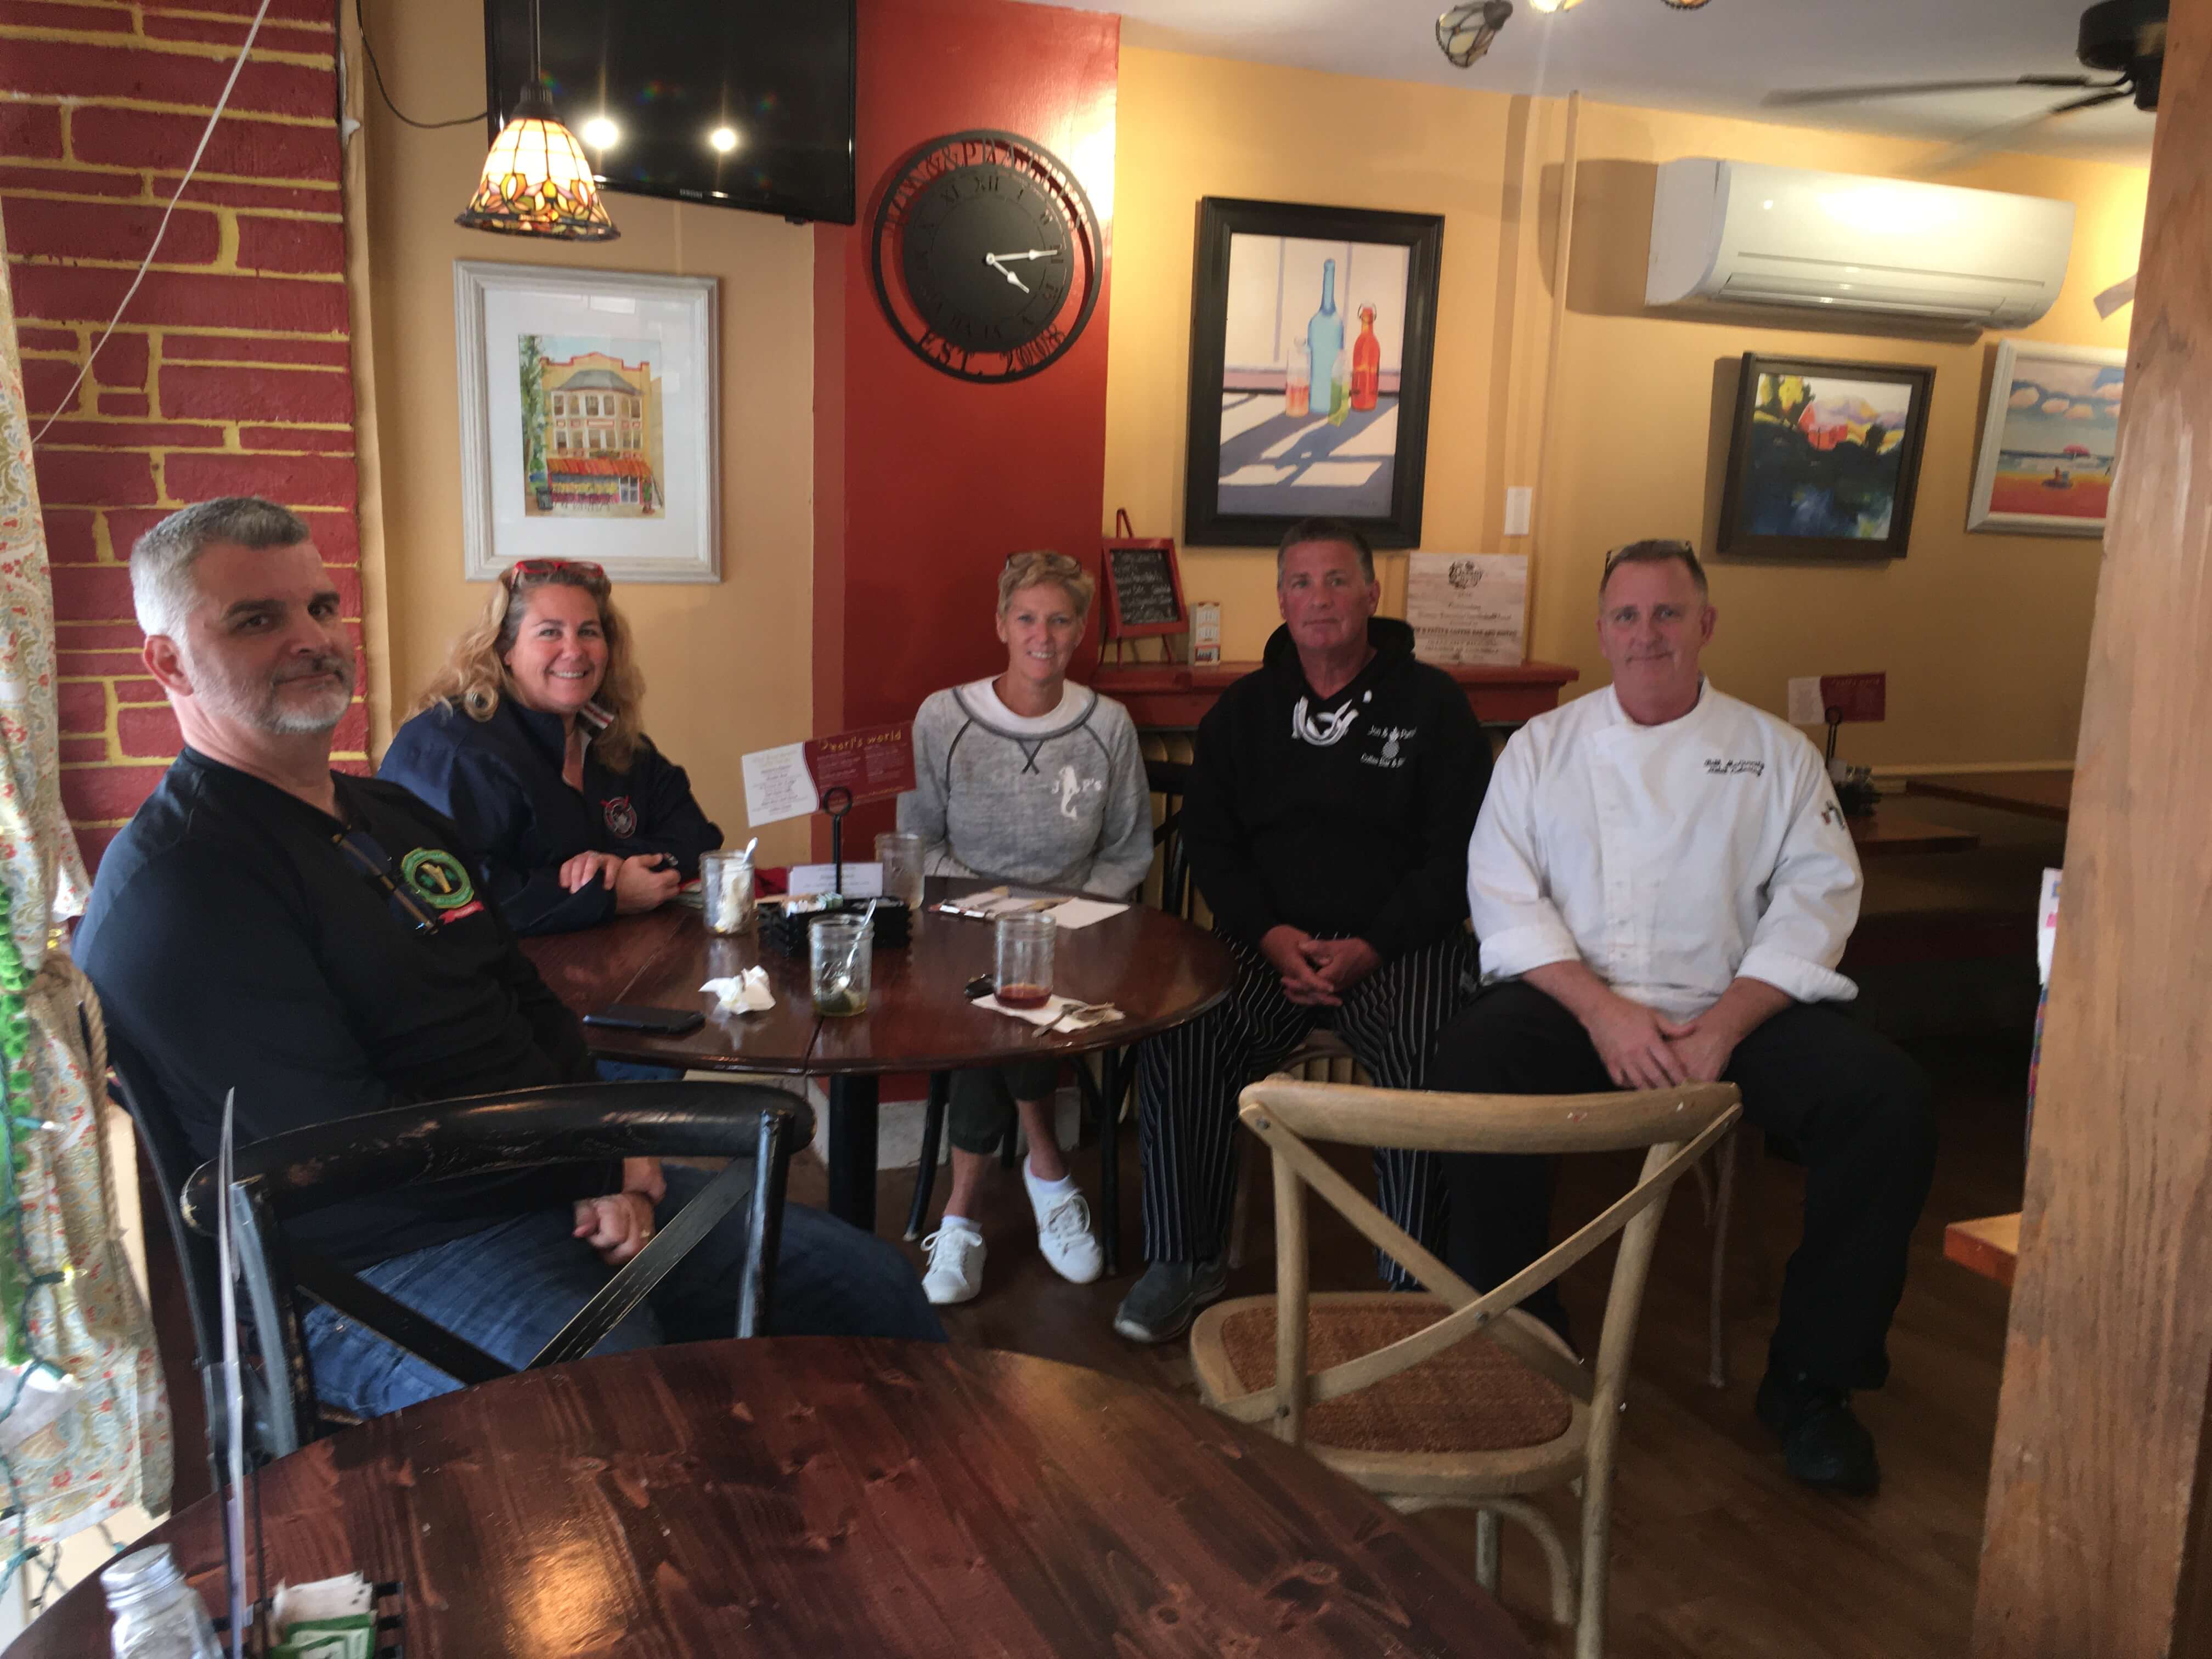 Members of OCNJ CARE meet to coordinate a response to COVID-19’s expected impact on Ocean City. Shown are Pastor Larry Oksten of St. Peter’s United Methodist Church